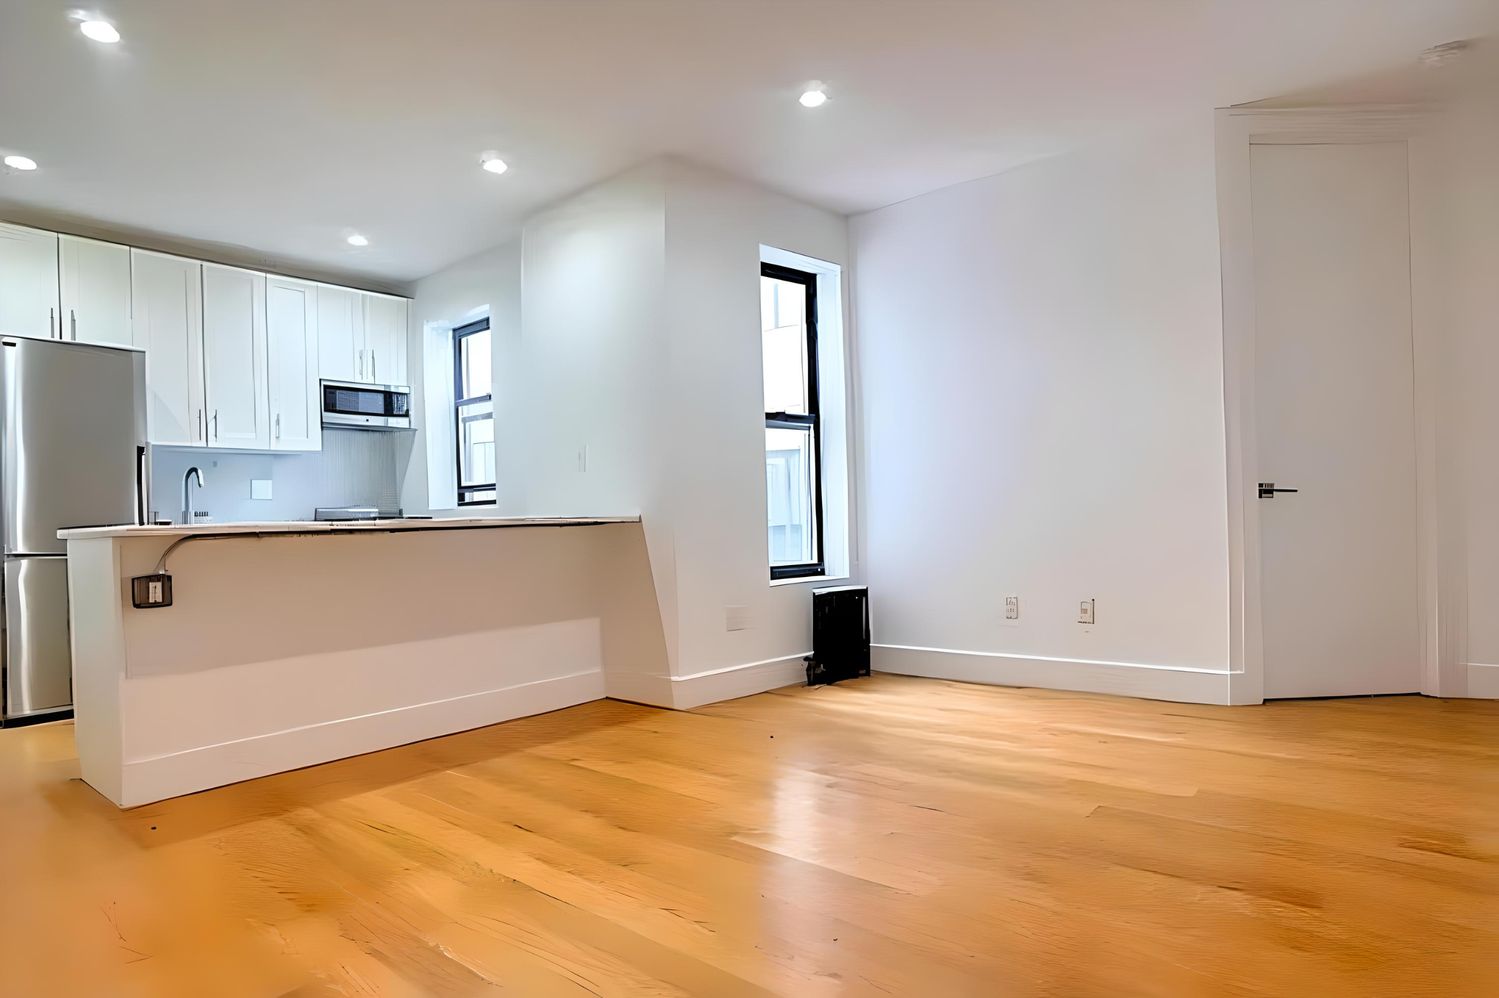 Apartments & Houses for Rent in Park Slope, Brooklyn, NY | Compass